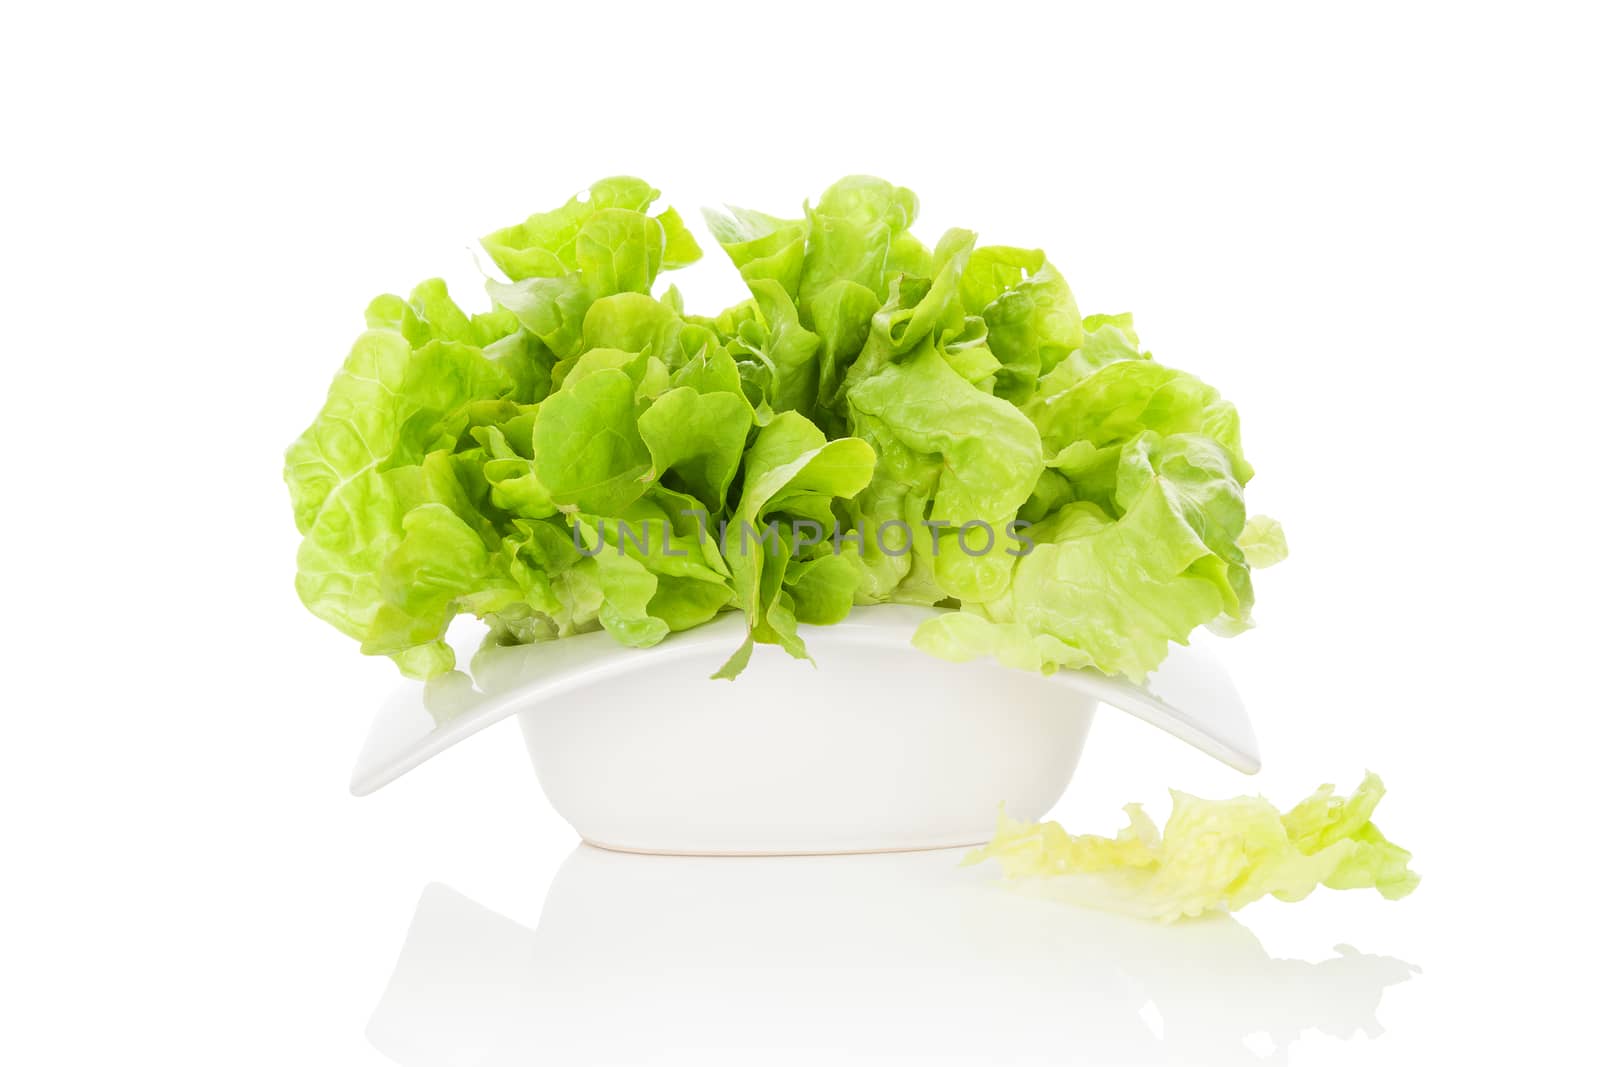 Fresh green salad in white bowl isolated on white background. Fresh healthy summer eating. Culinary arts.